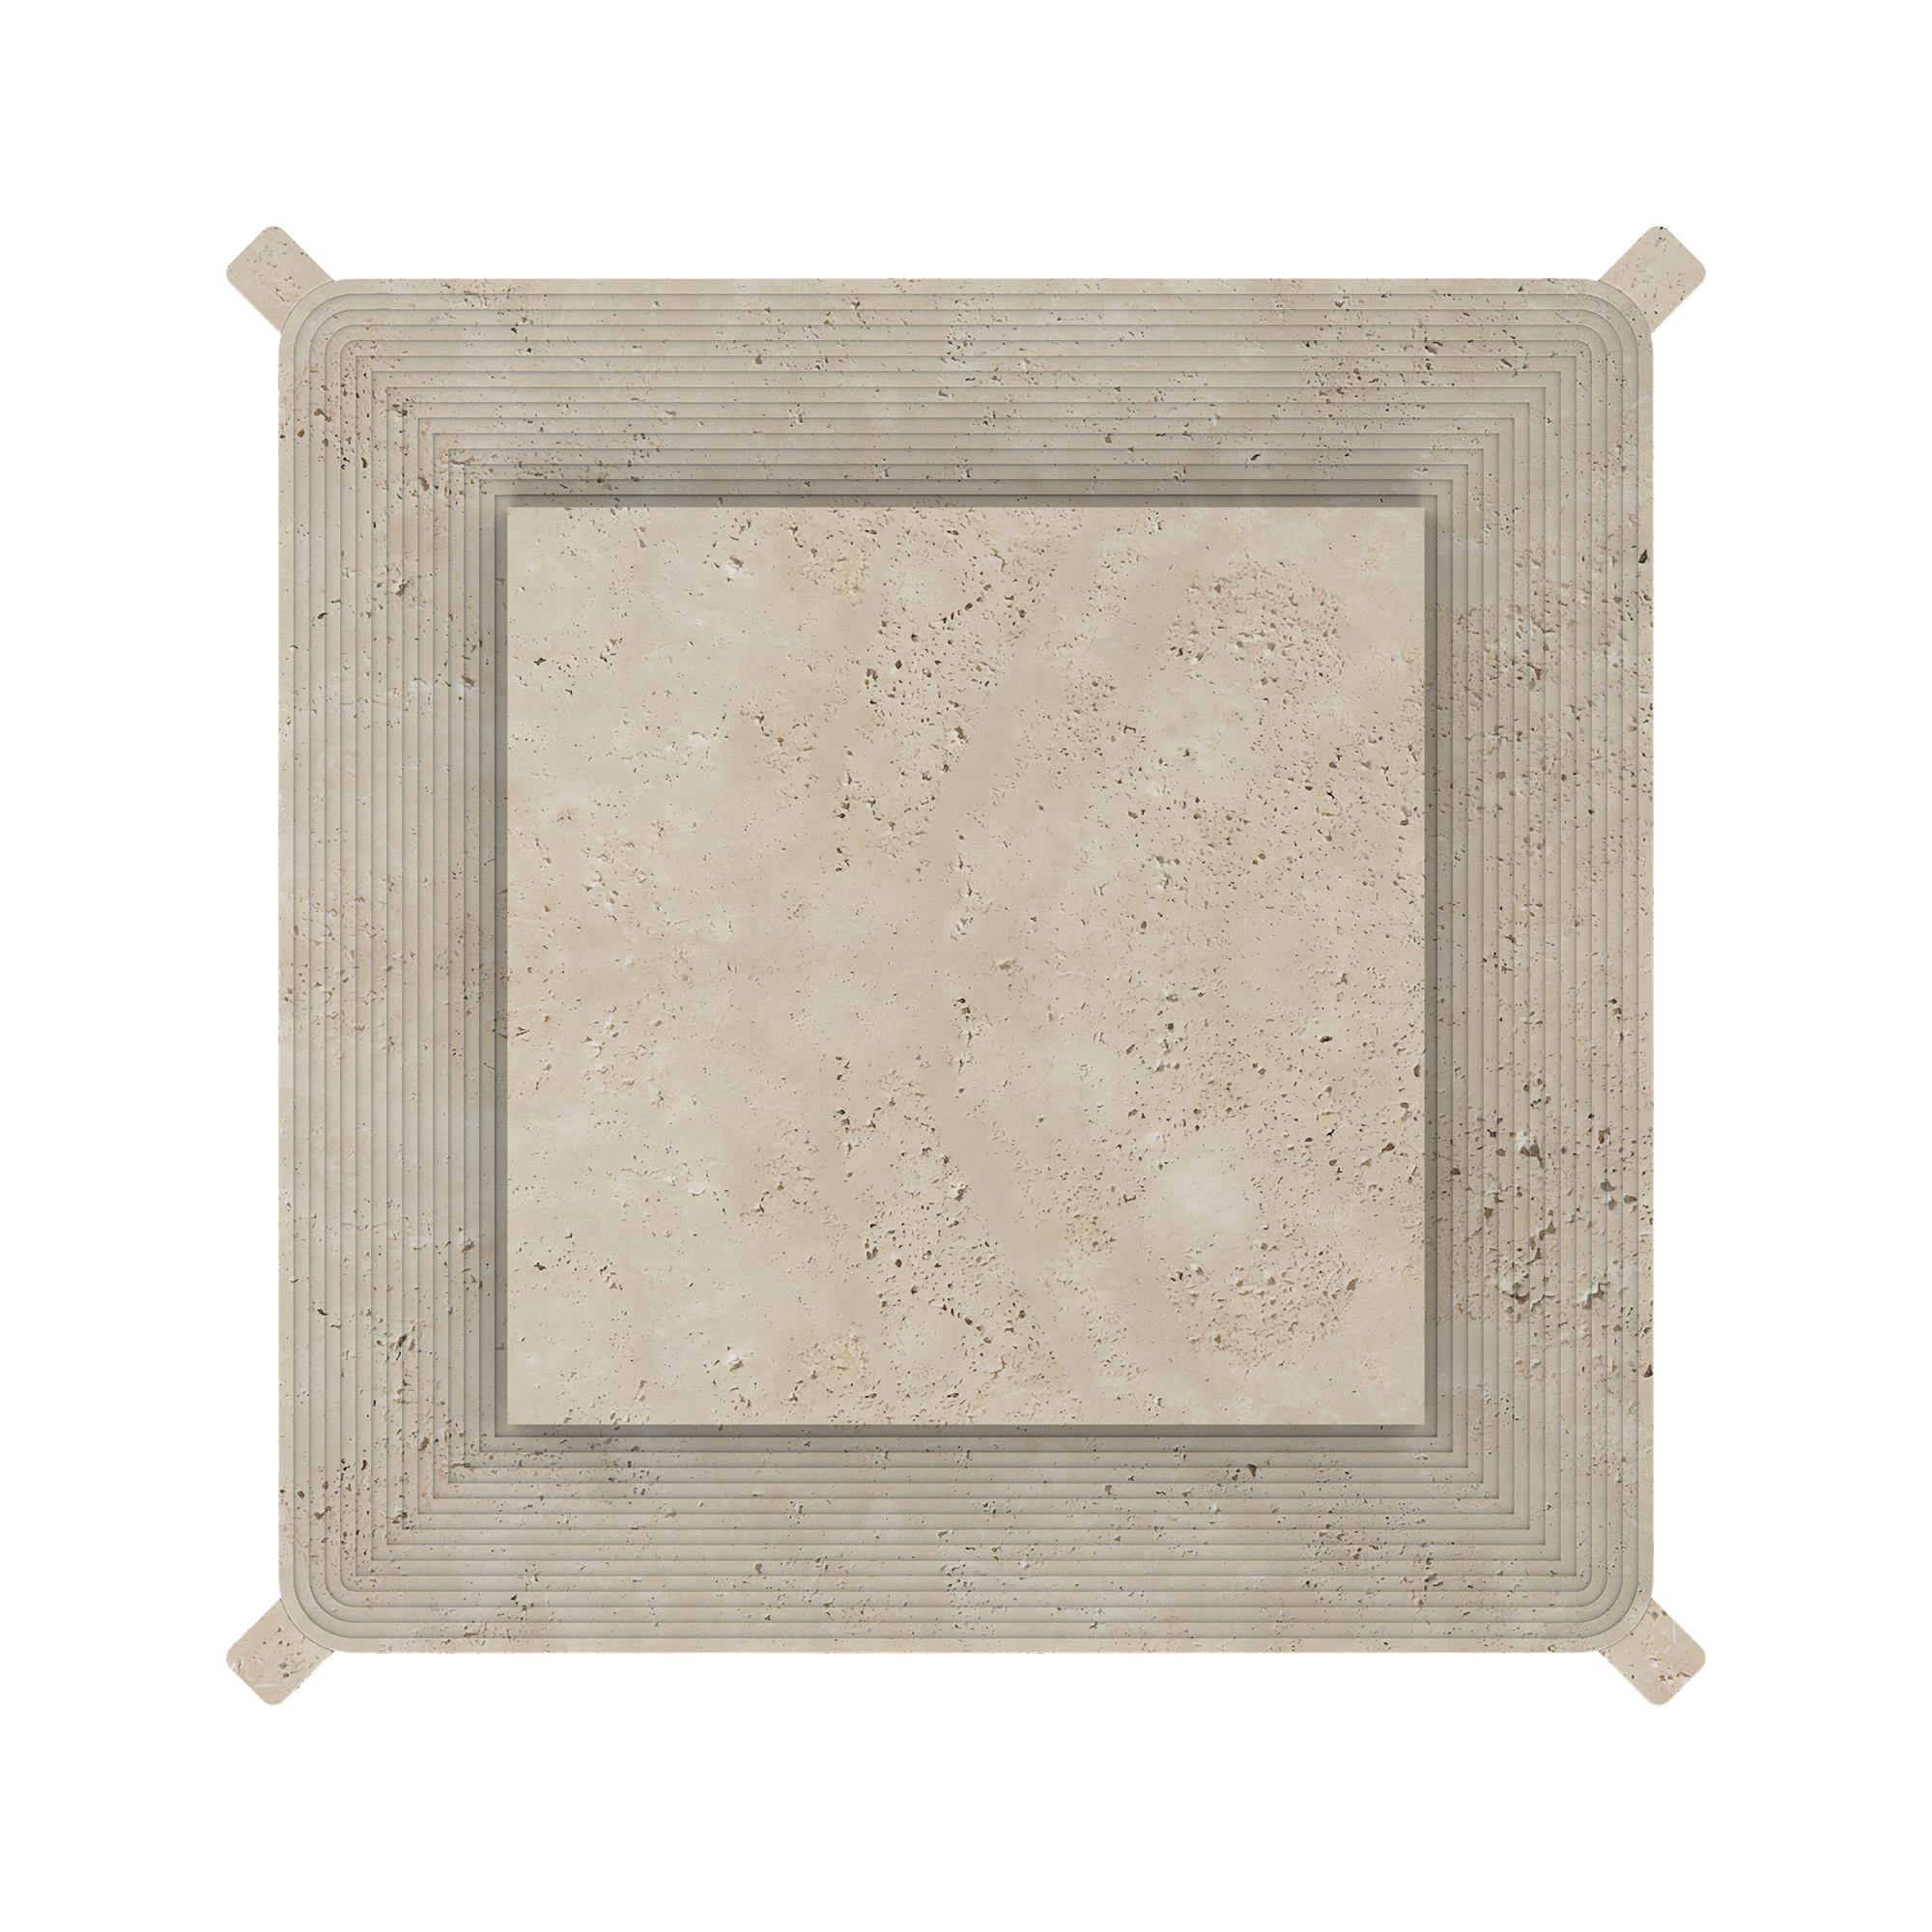 Carved Arkhe No 2 Coffee Table Square Travertine, Modern Sculptural by Fulden Topaloglu For Sale